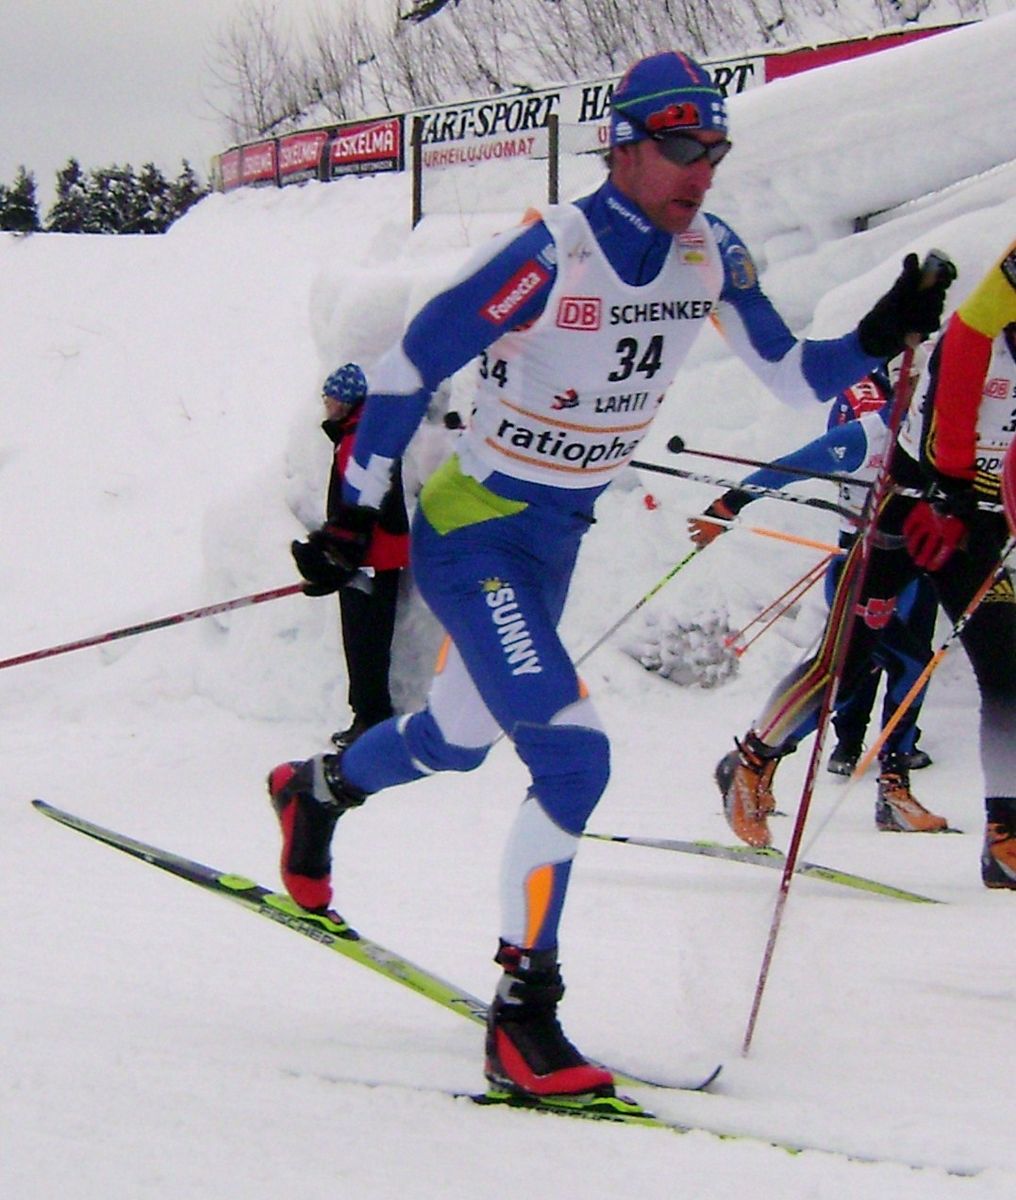 Finnish cross country skier Tero Similä at Lahti Ski Games 2010. In March 2014, Similä tested positive for EPO. (Photo: Wikimedia Commons)